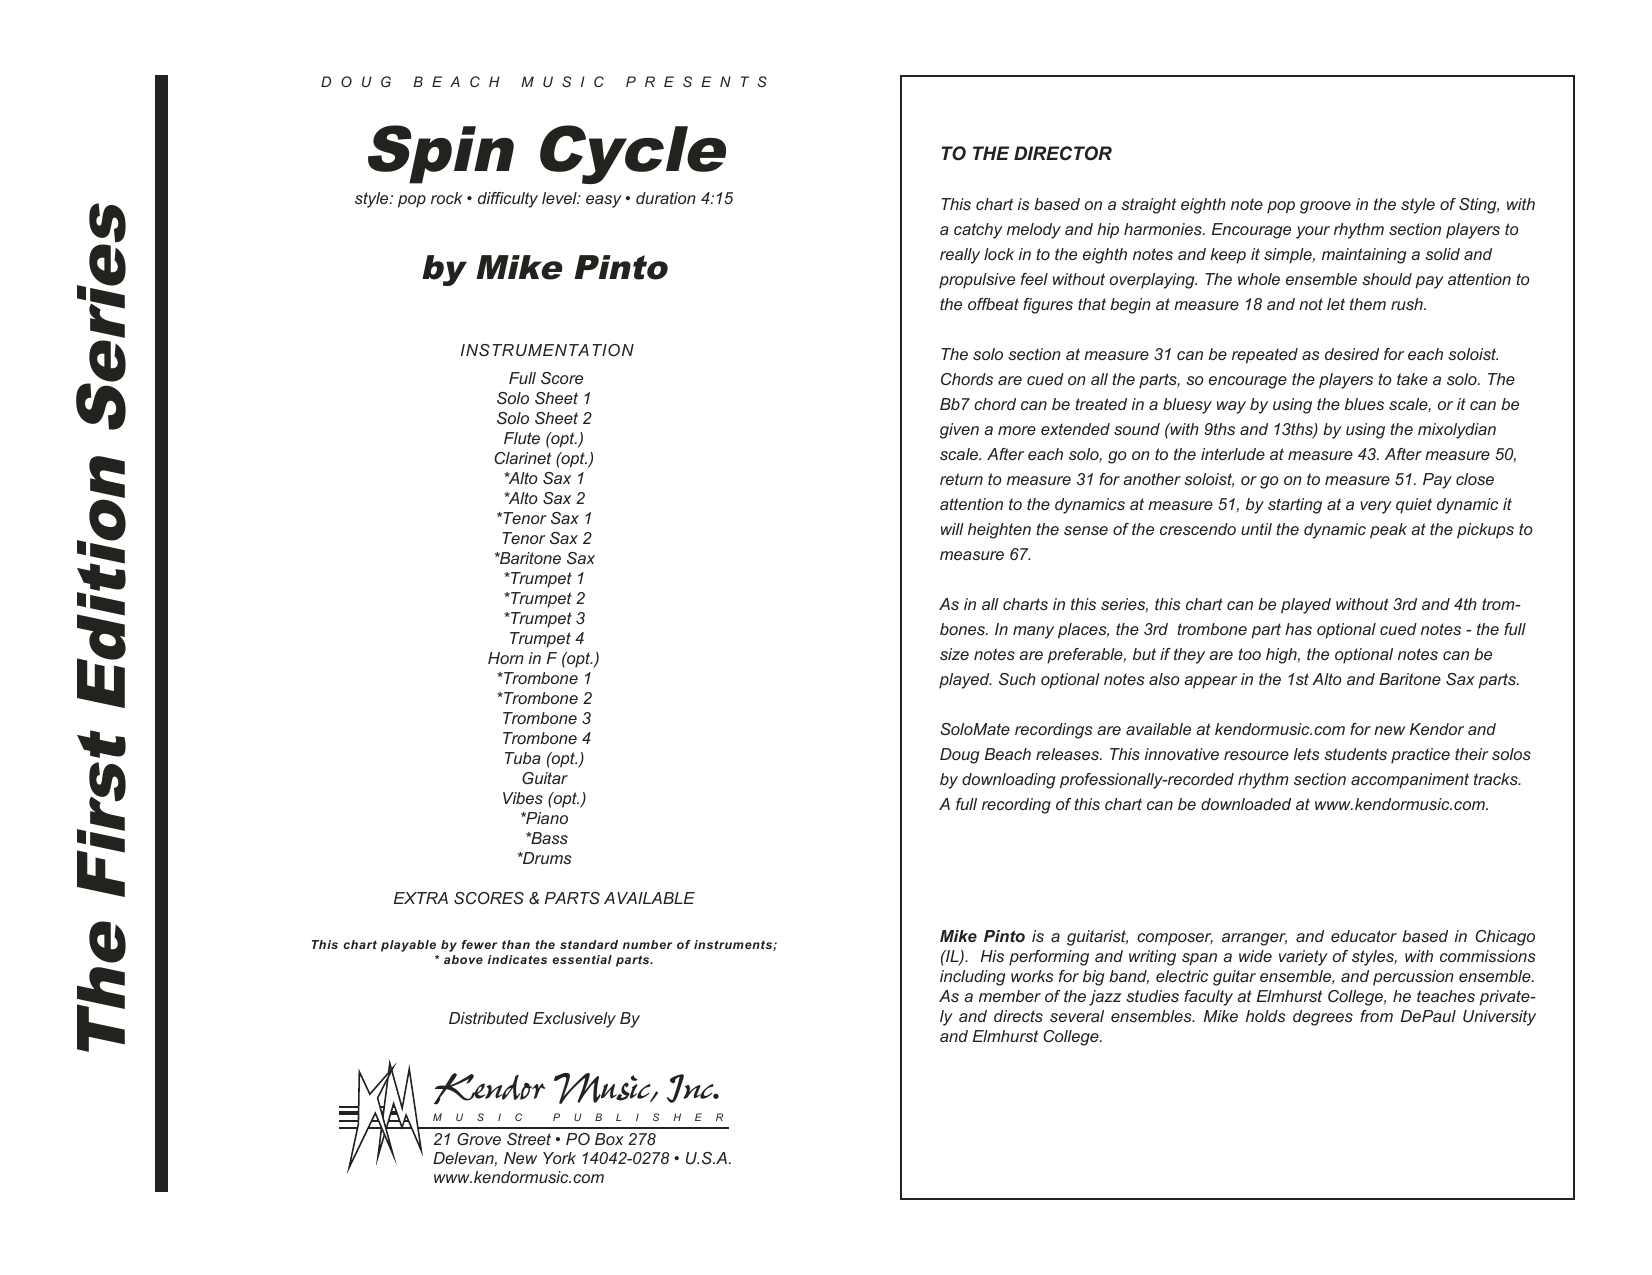 Download Mike Pinto Spin Cycle - Full Score Sheet Music